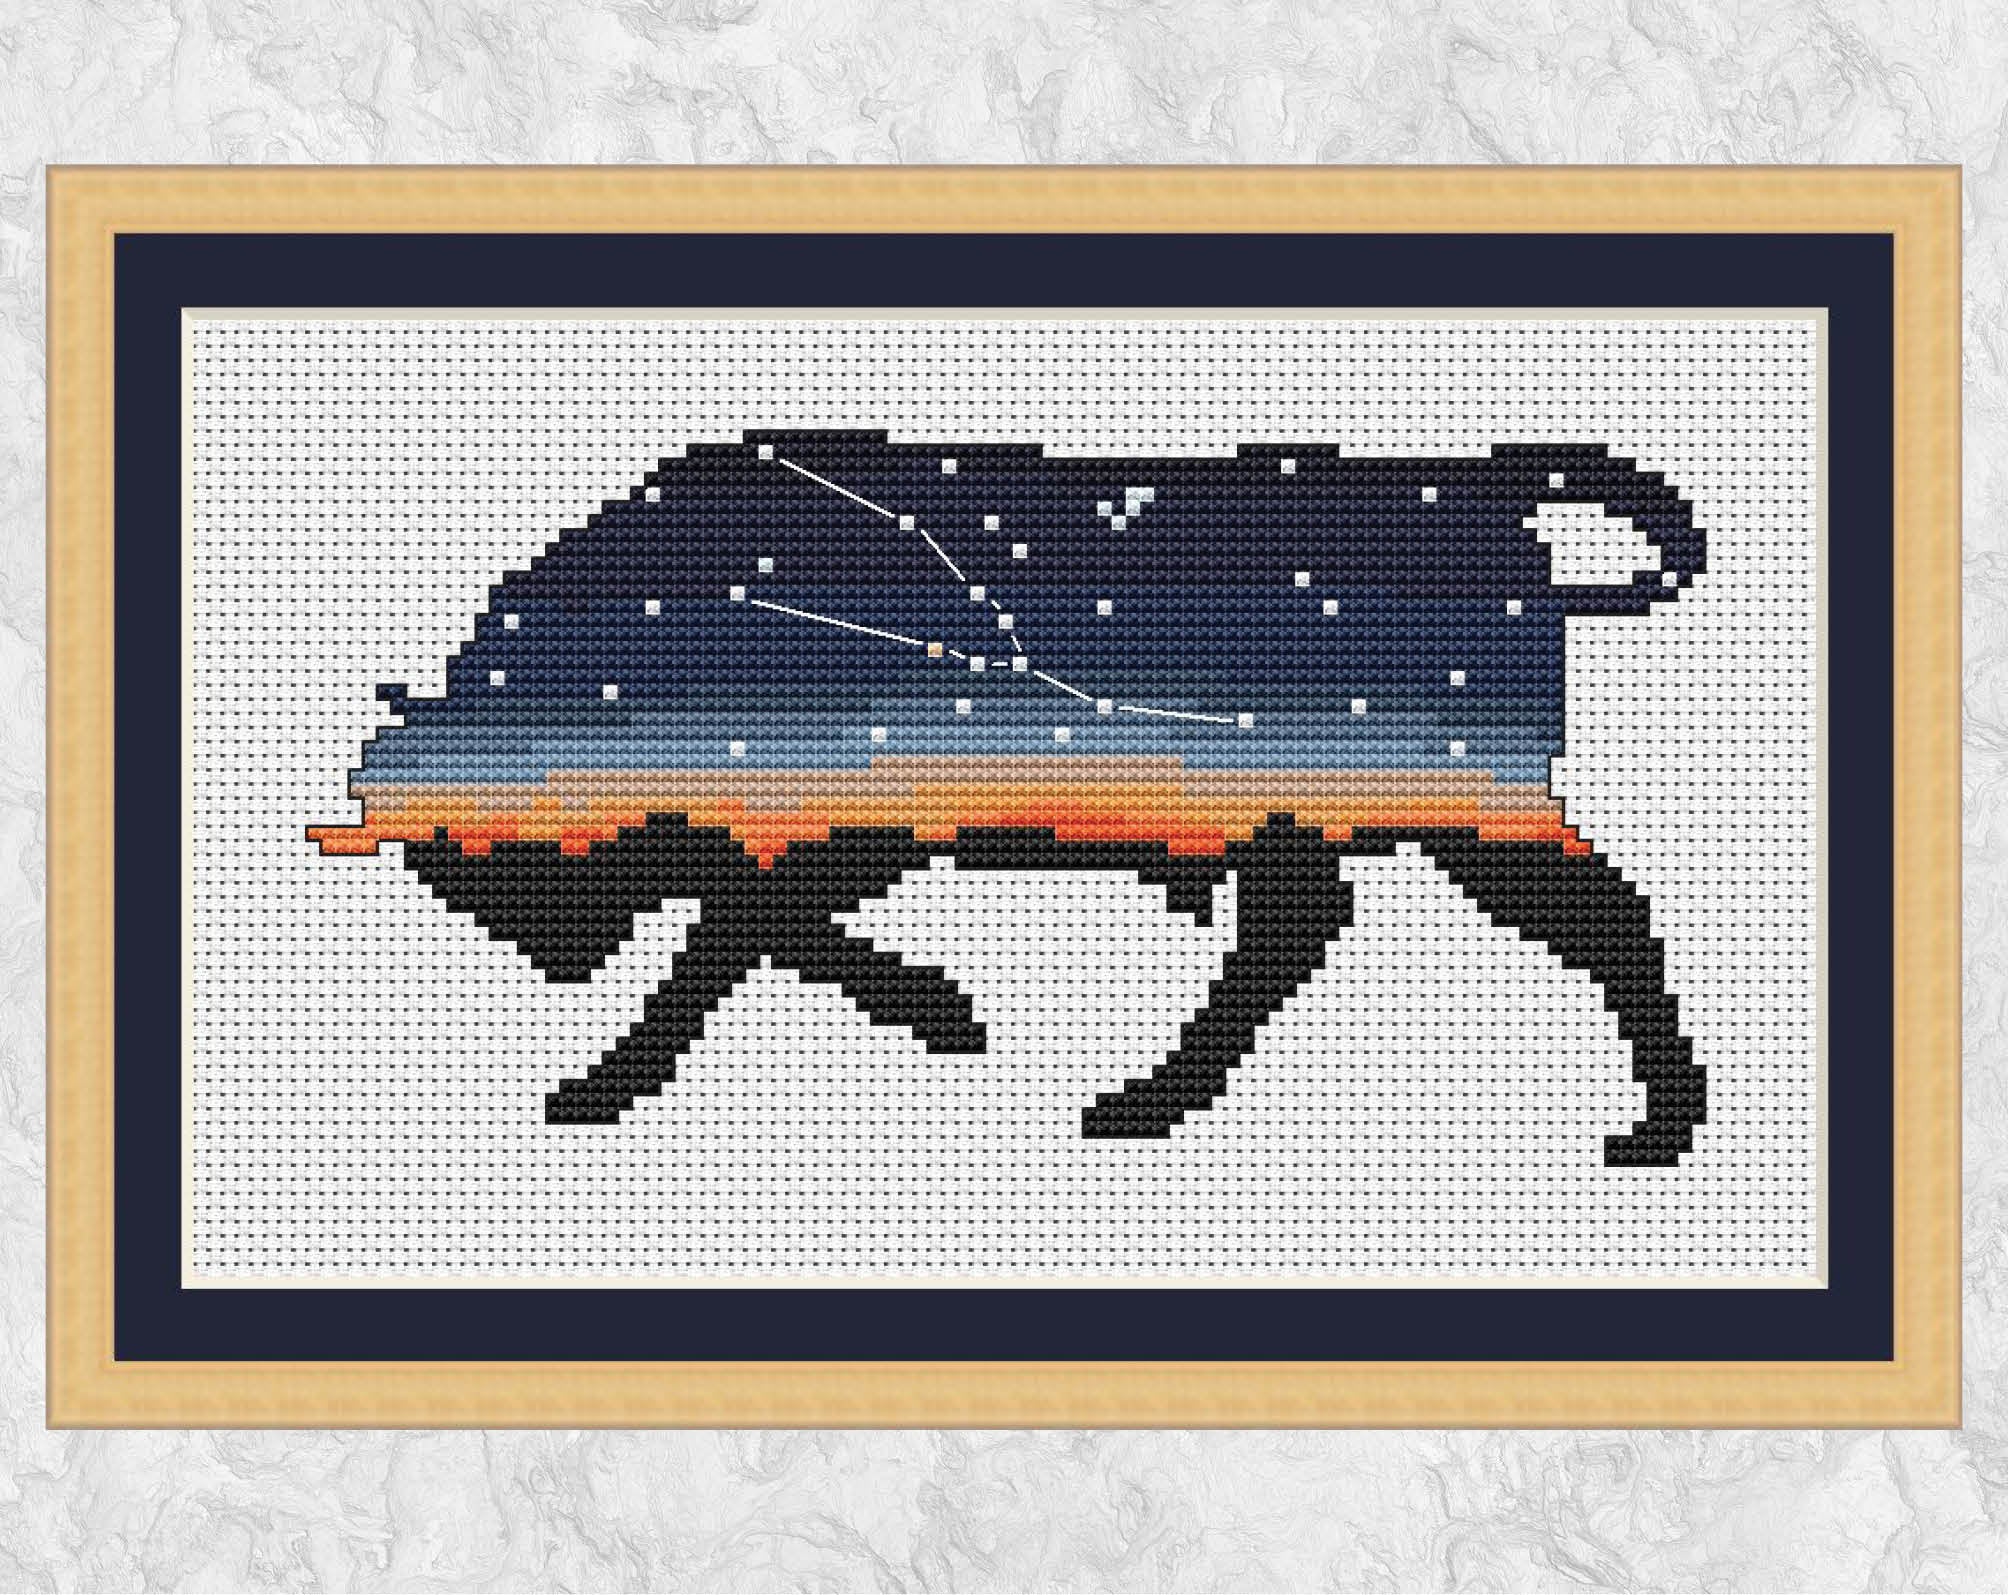 Taurus cross stitch pattern - outline of a bull with the Taurus constellation inside the silhouette. Astronomy or space pattern or for those with Taurus star sign. Shown with frame.